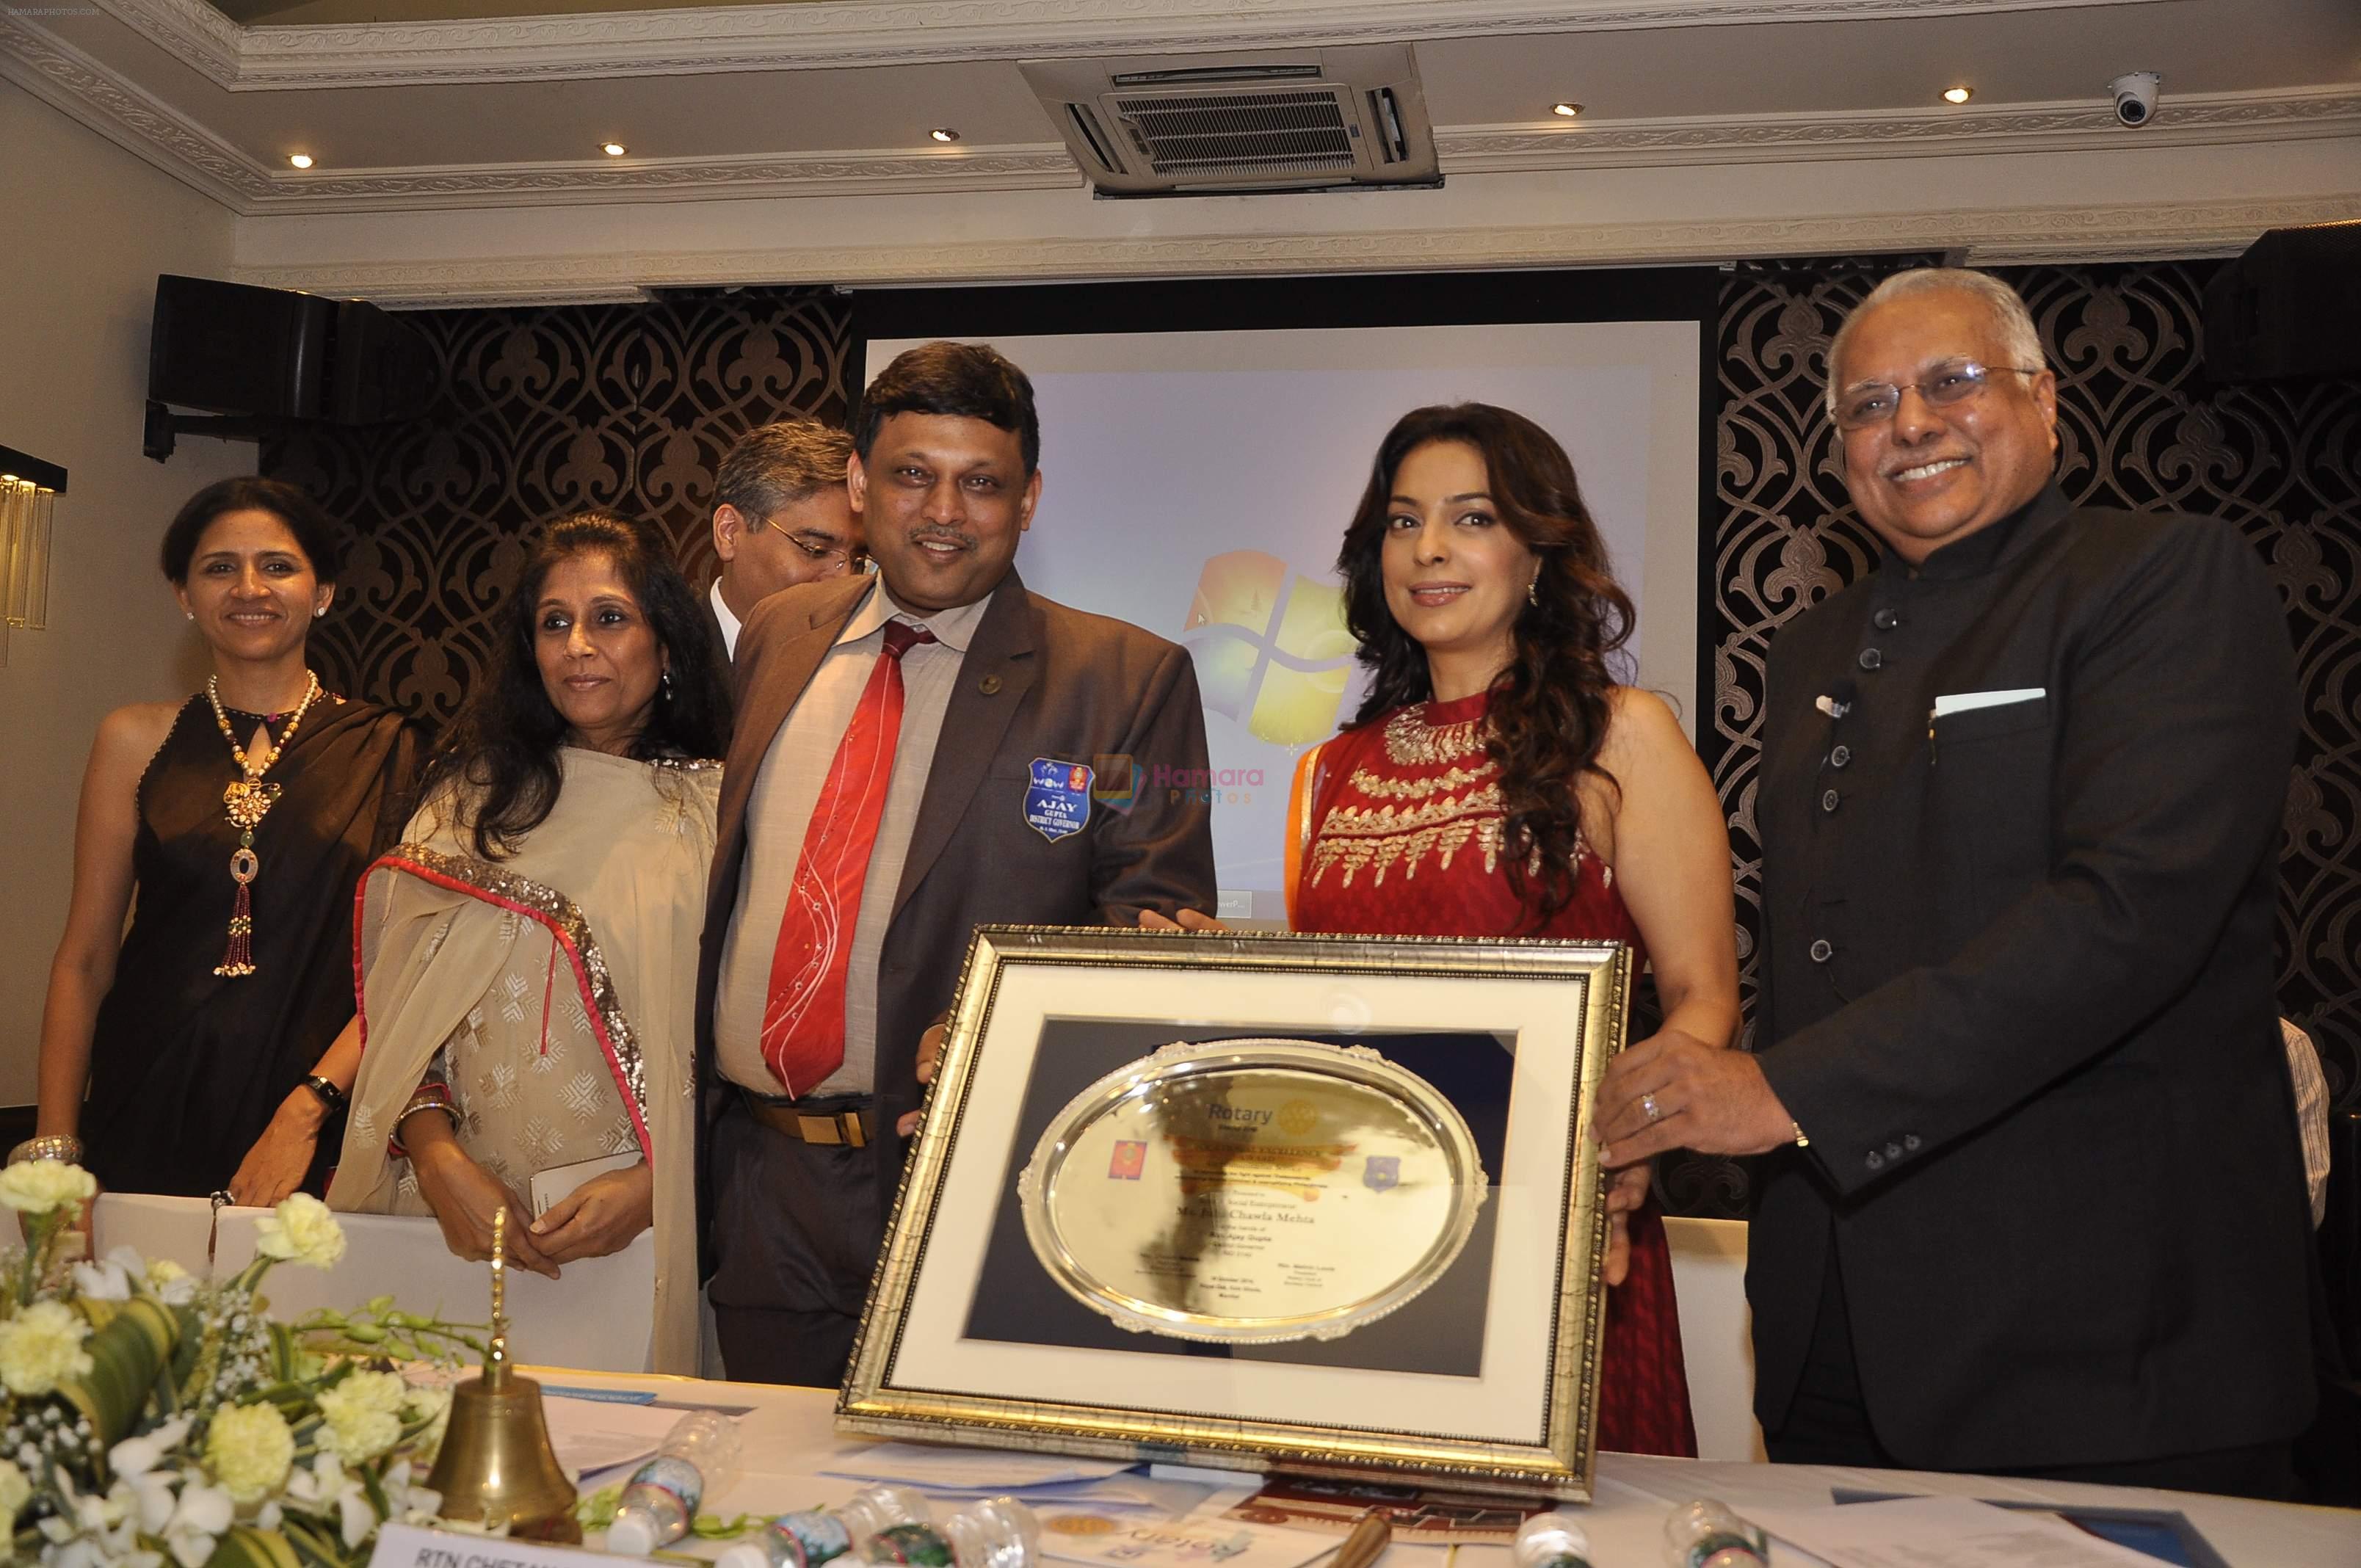 Juhi Chawla receives the vocational excellence award from the Rotary international on 10th Oct 2014